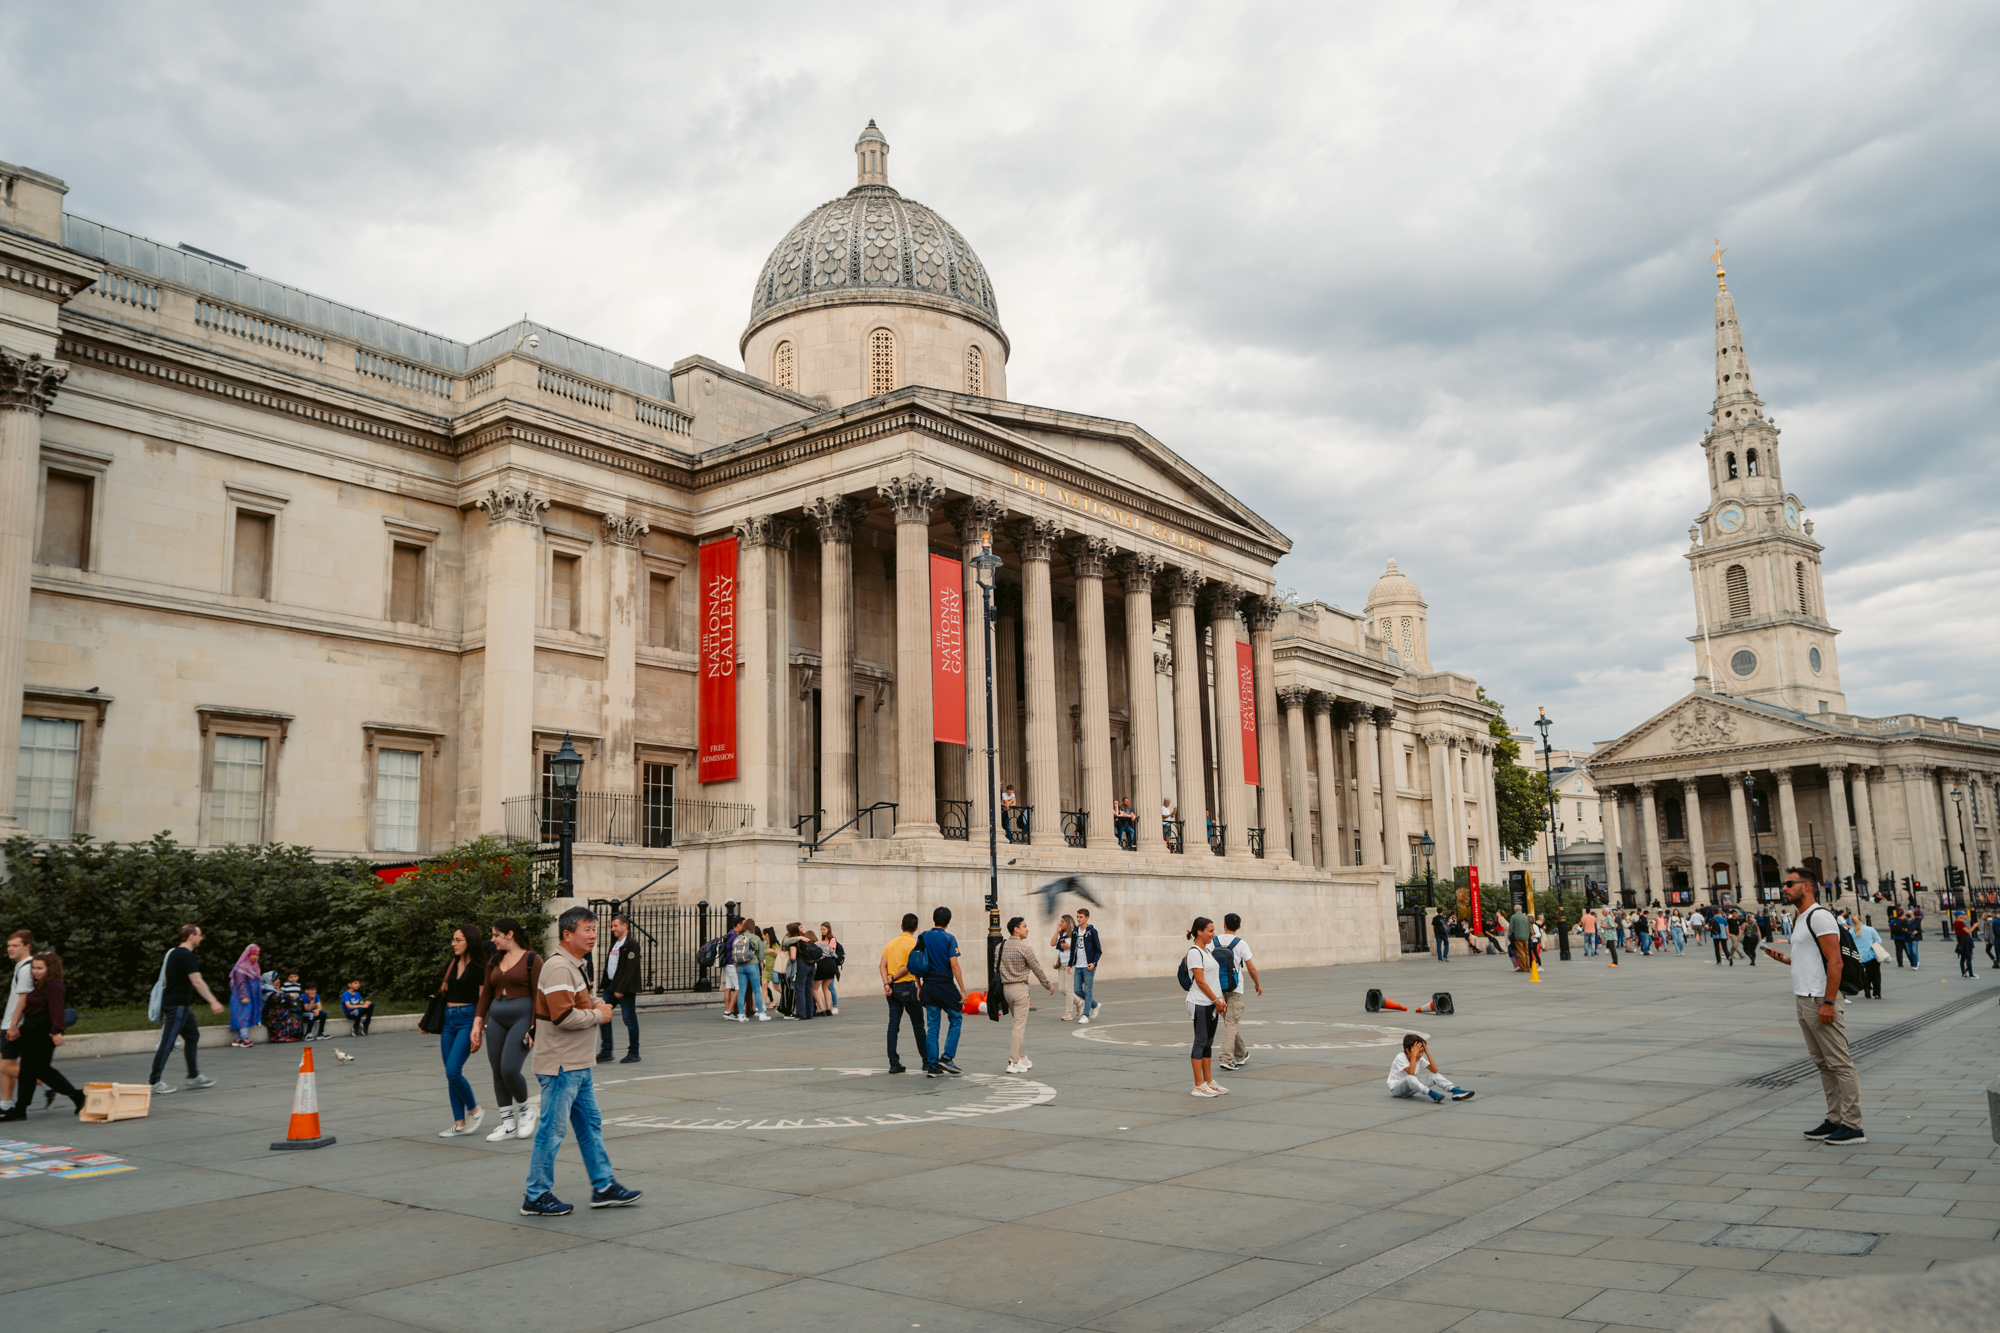 fun places to visit in london